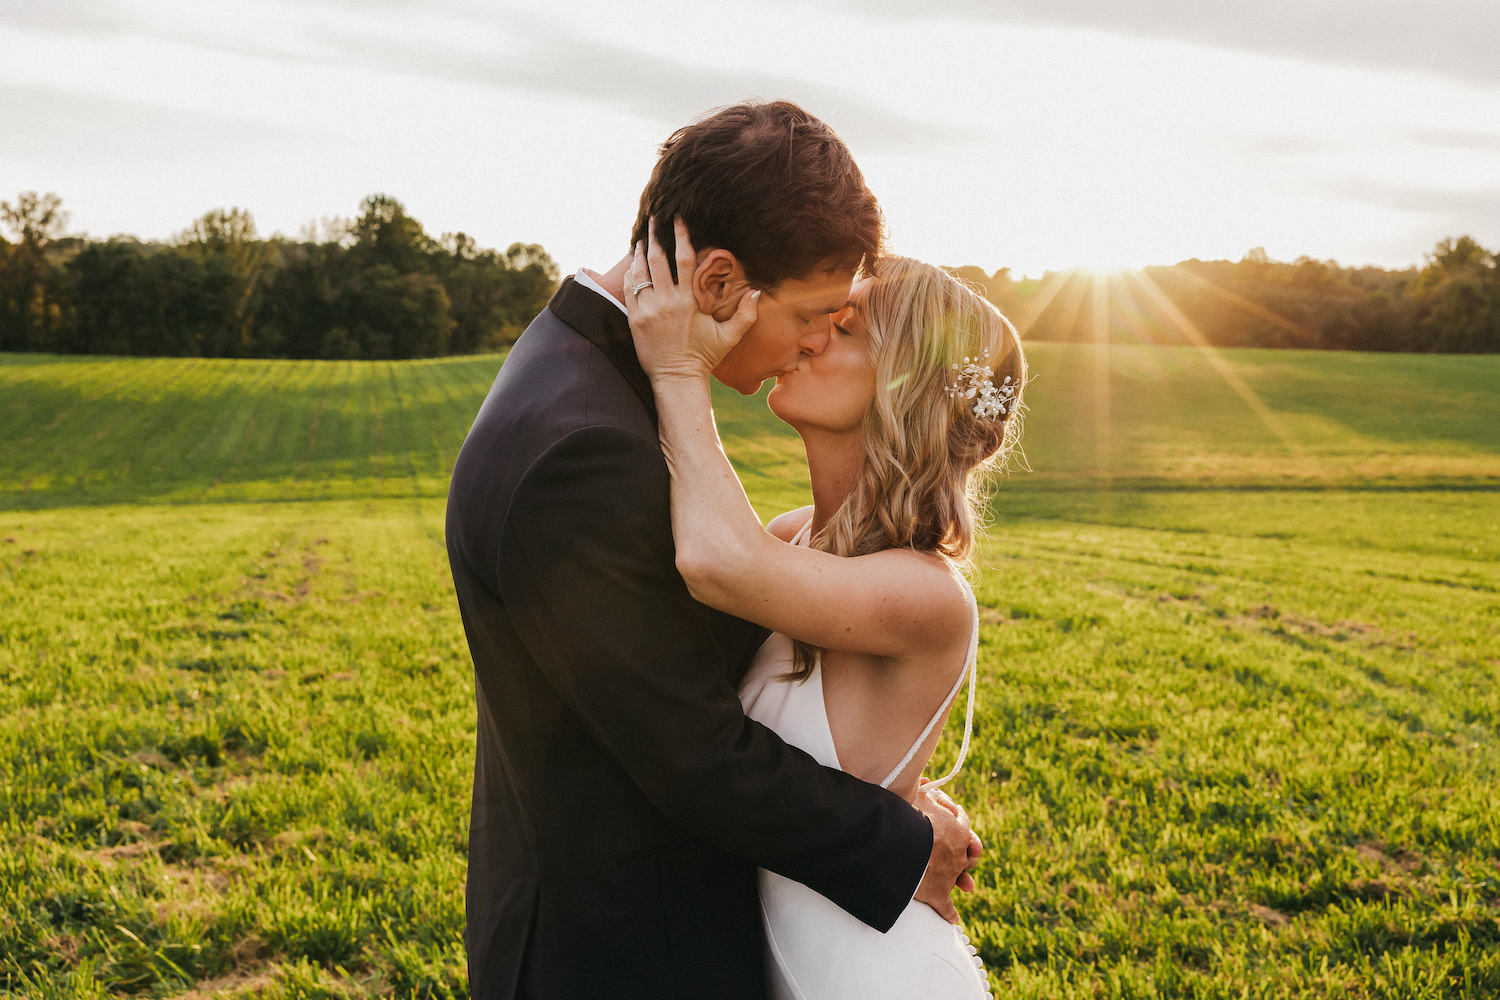 Bride and groom sharing a kiss in the middle of a vast green field with the sun setting in the horizon behind them, captured by Rachel Yearick Photography